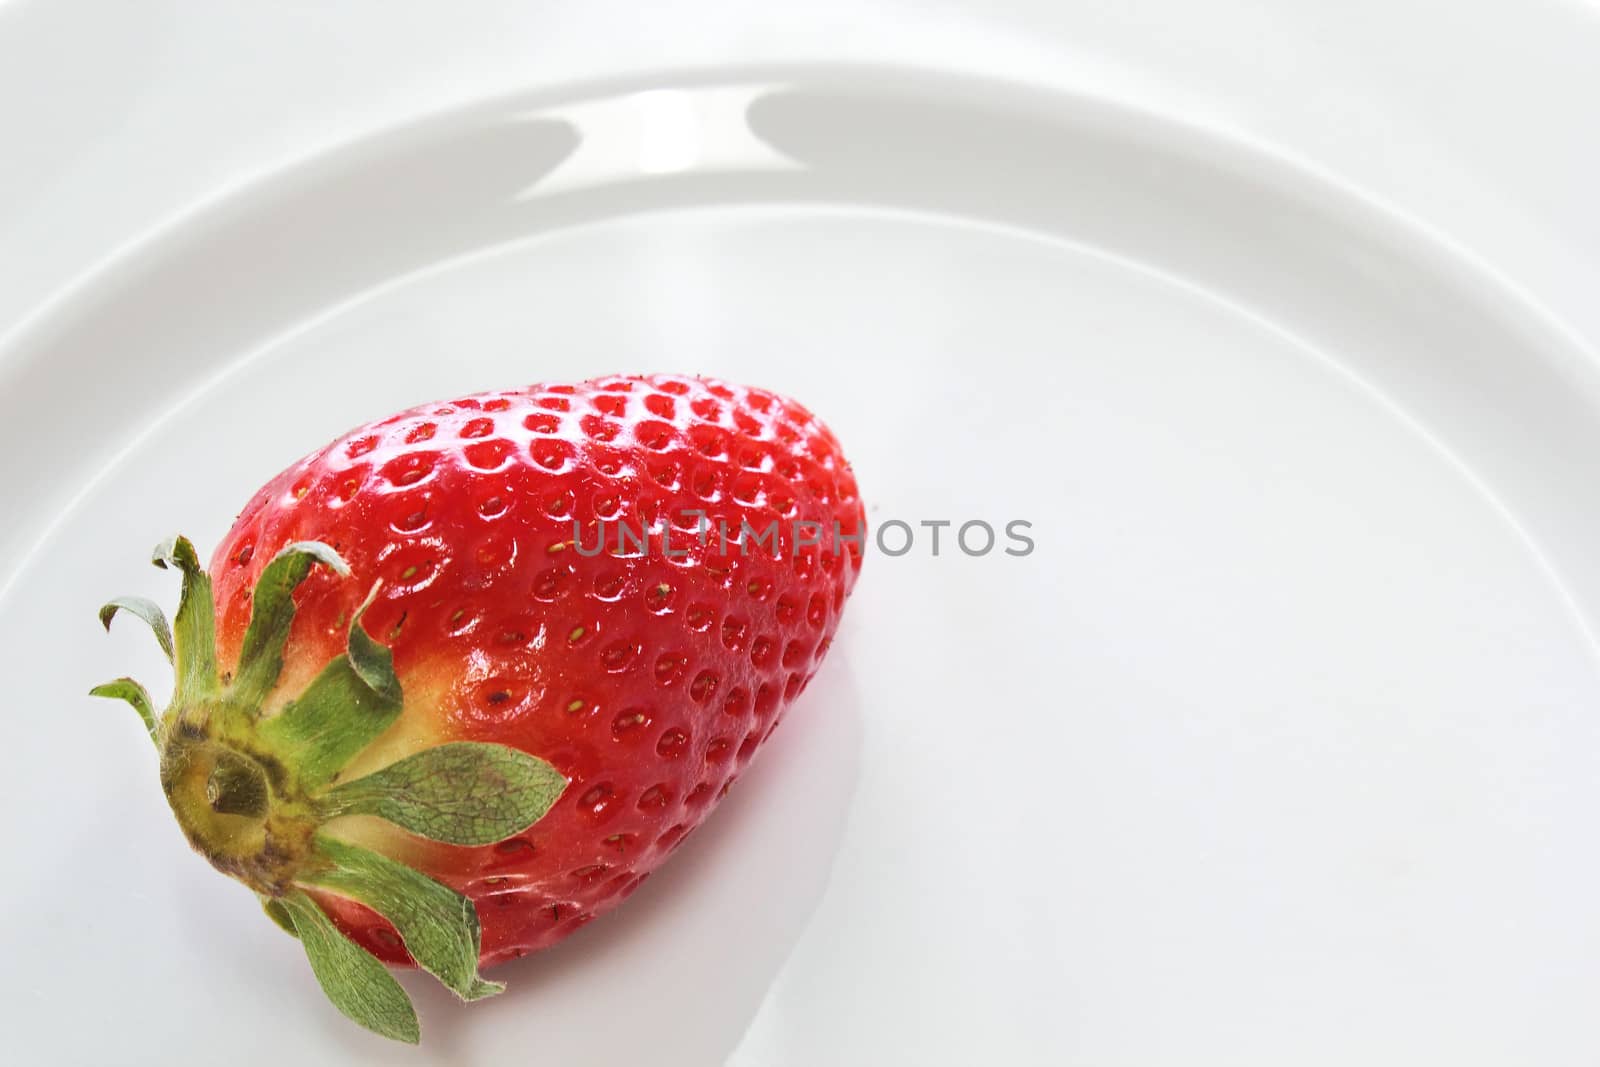 Strawberrie on dish by dynamicfoto